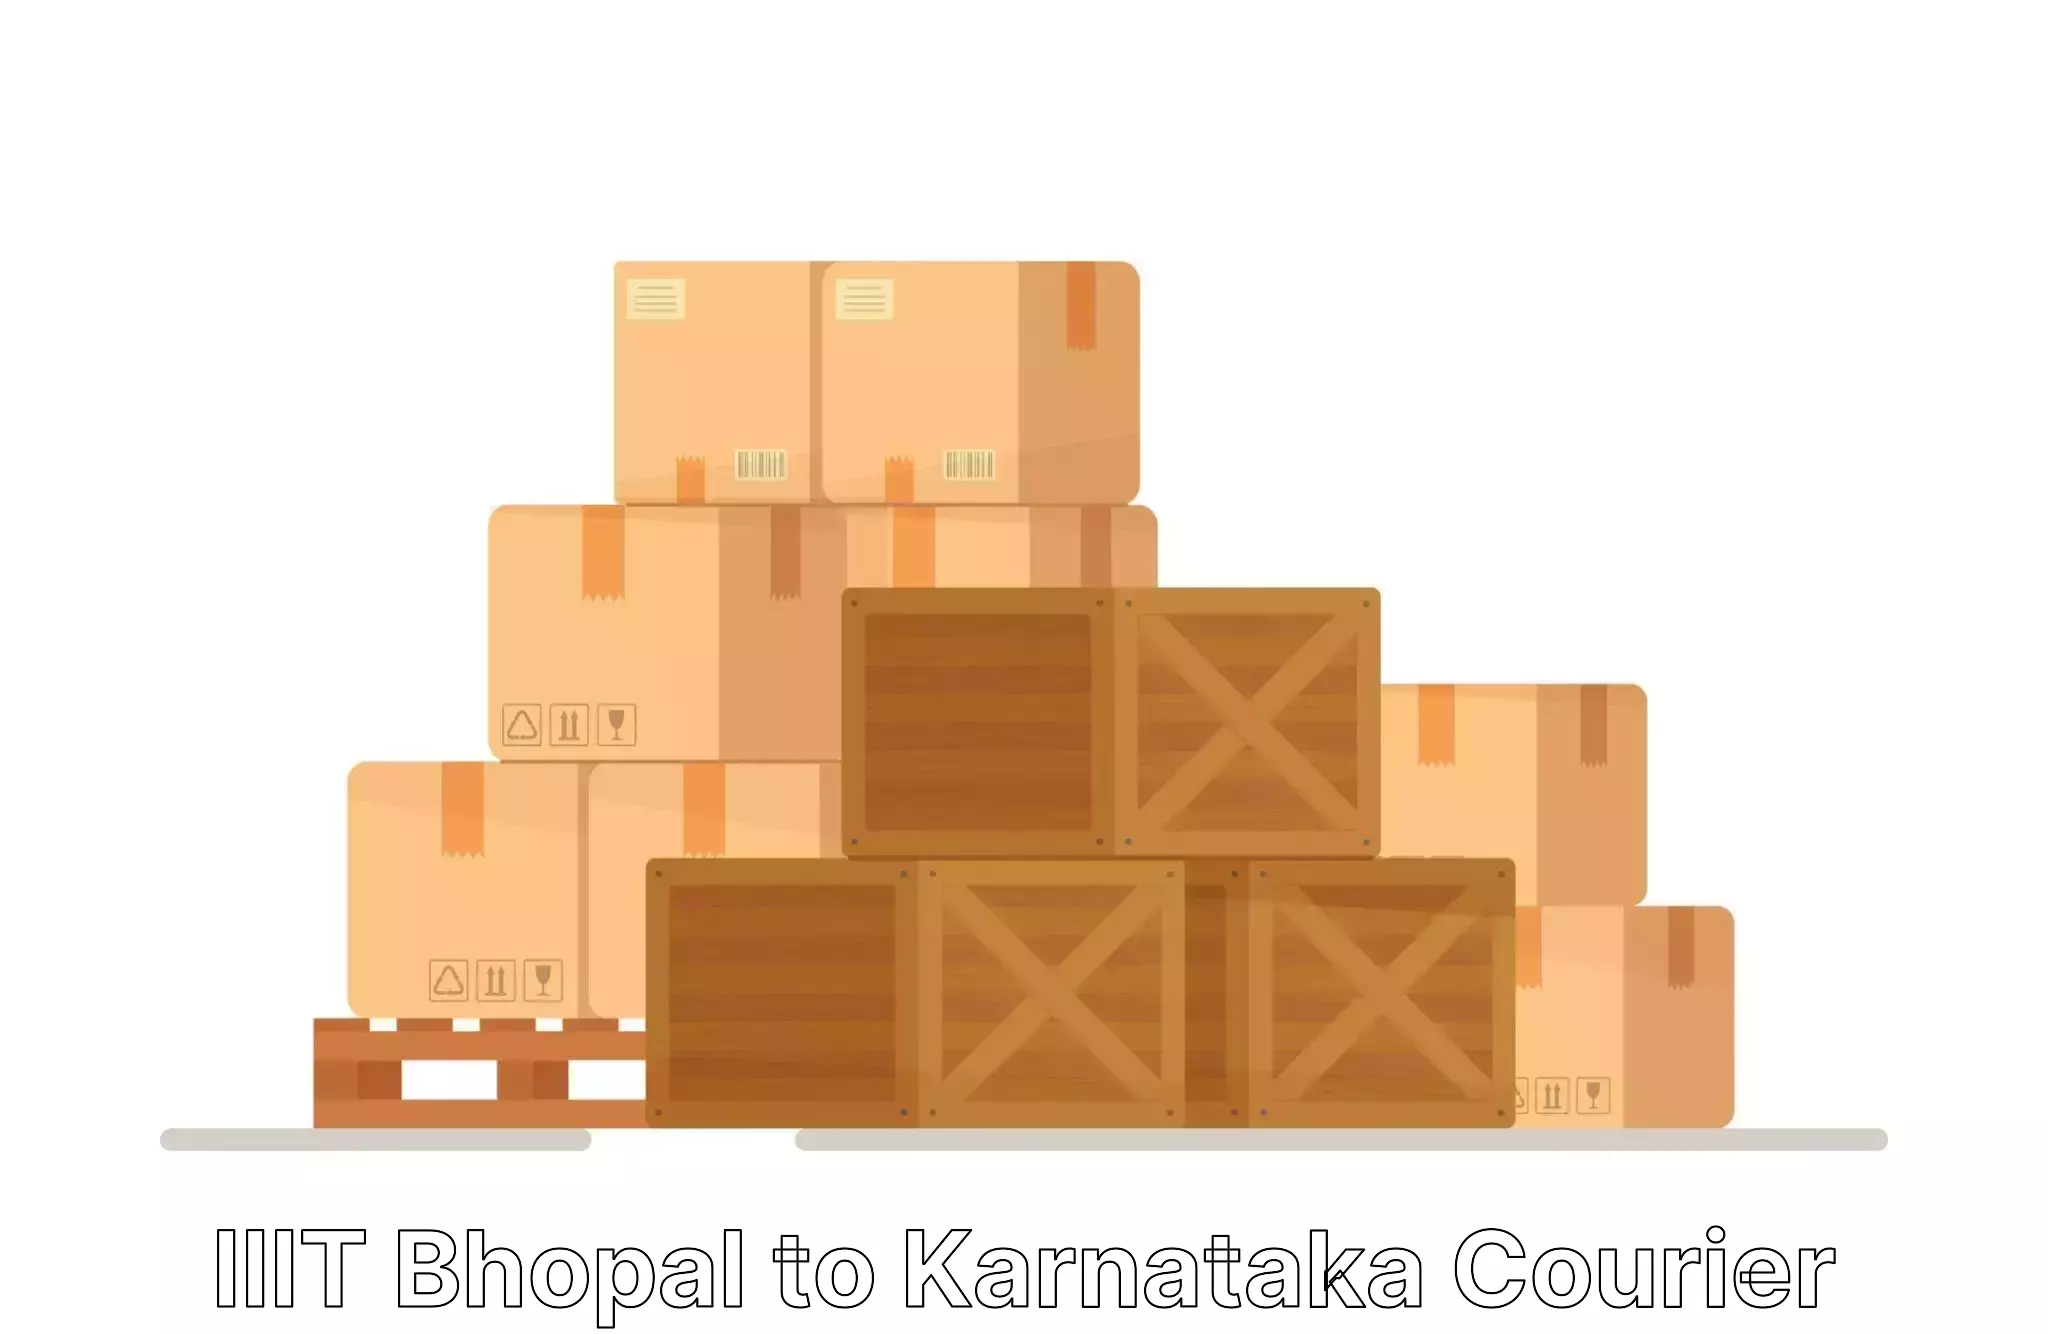 Residential moving services IIIT Bhopal to Karnataka